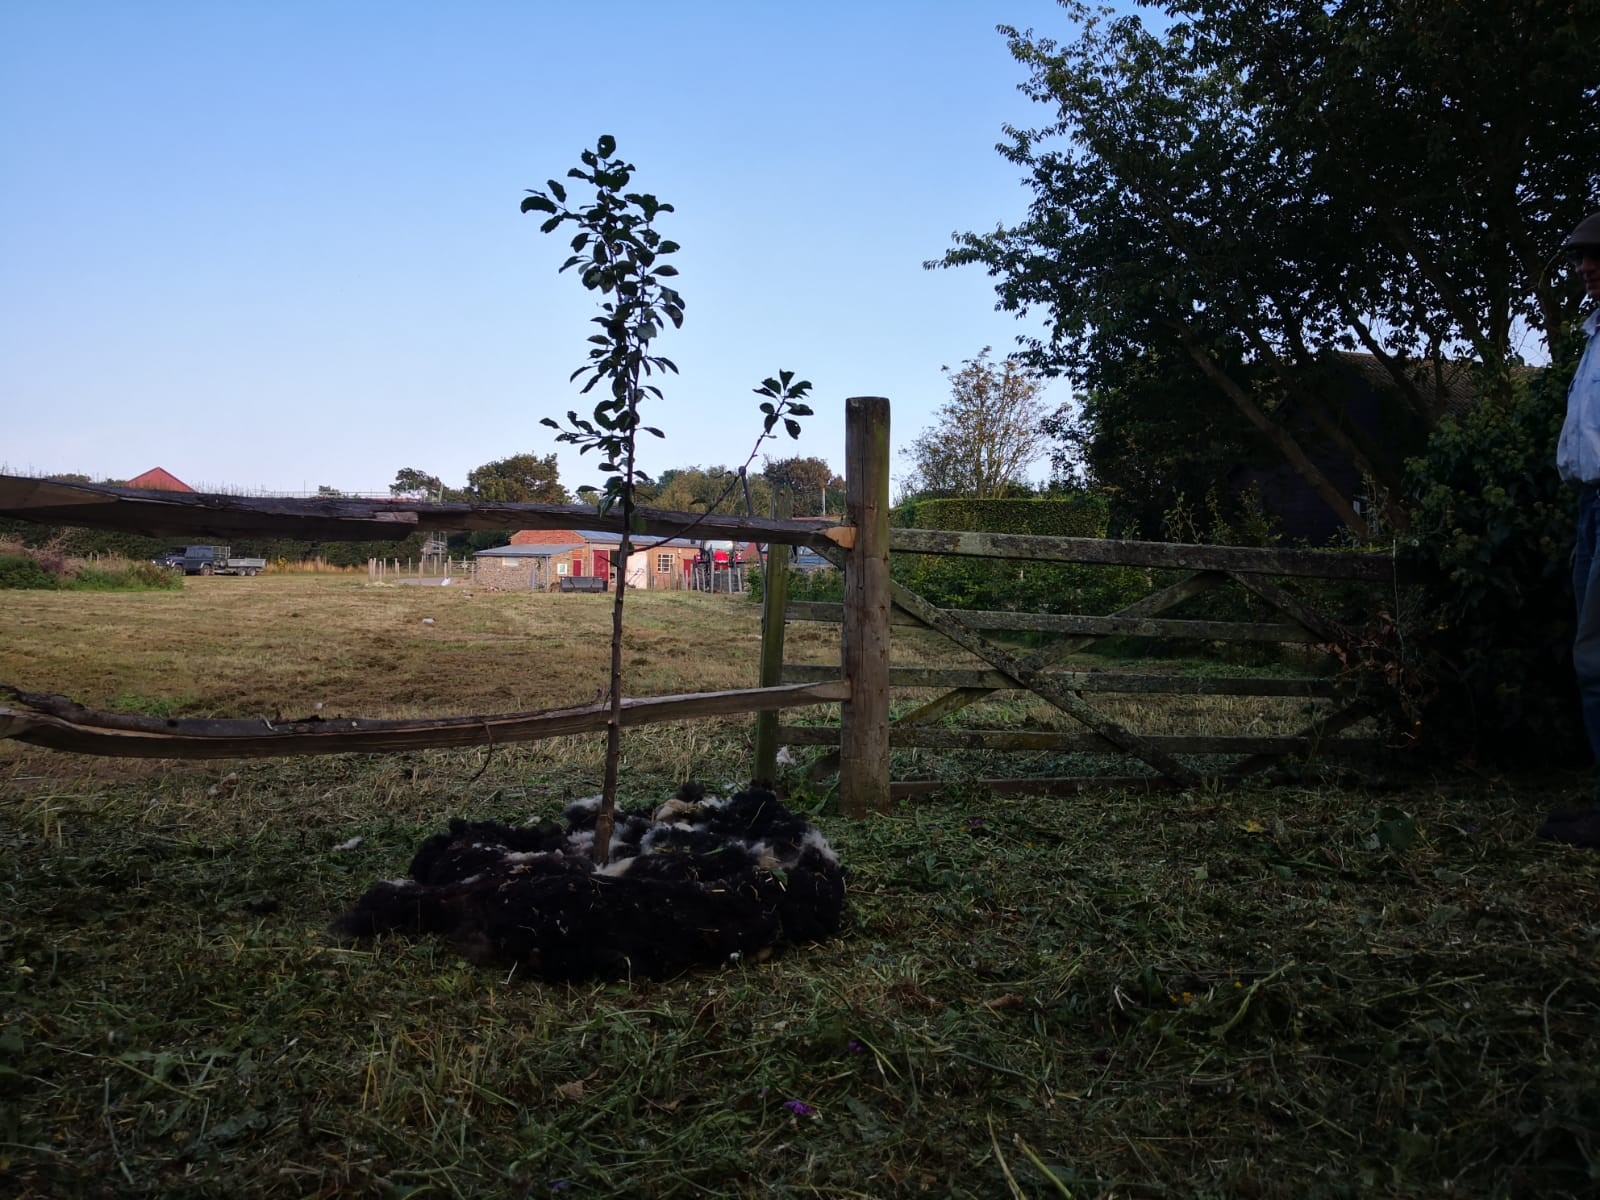 A little idea we had recently about how to re-use & recycle our sheep fleeces – wrap them around the newly planted trees. This prevents weeds & creates a mulch, which is more sustainable & better for the environment than buying compost